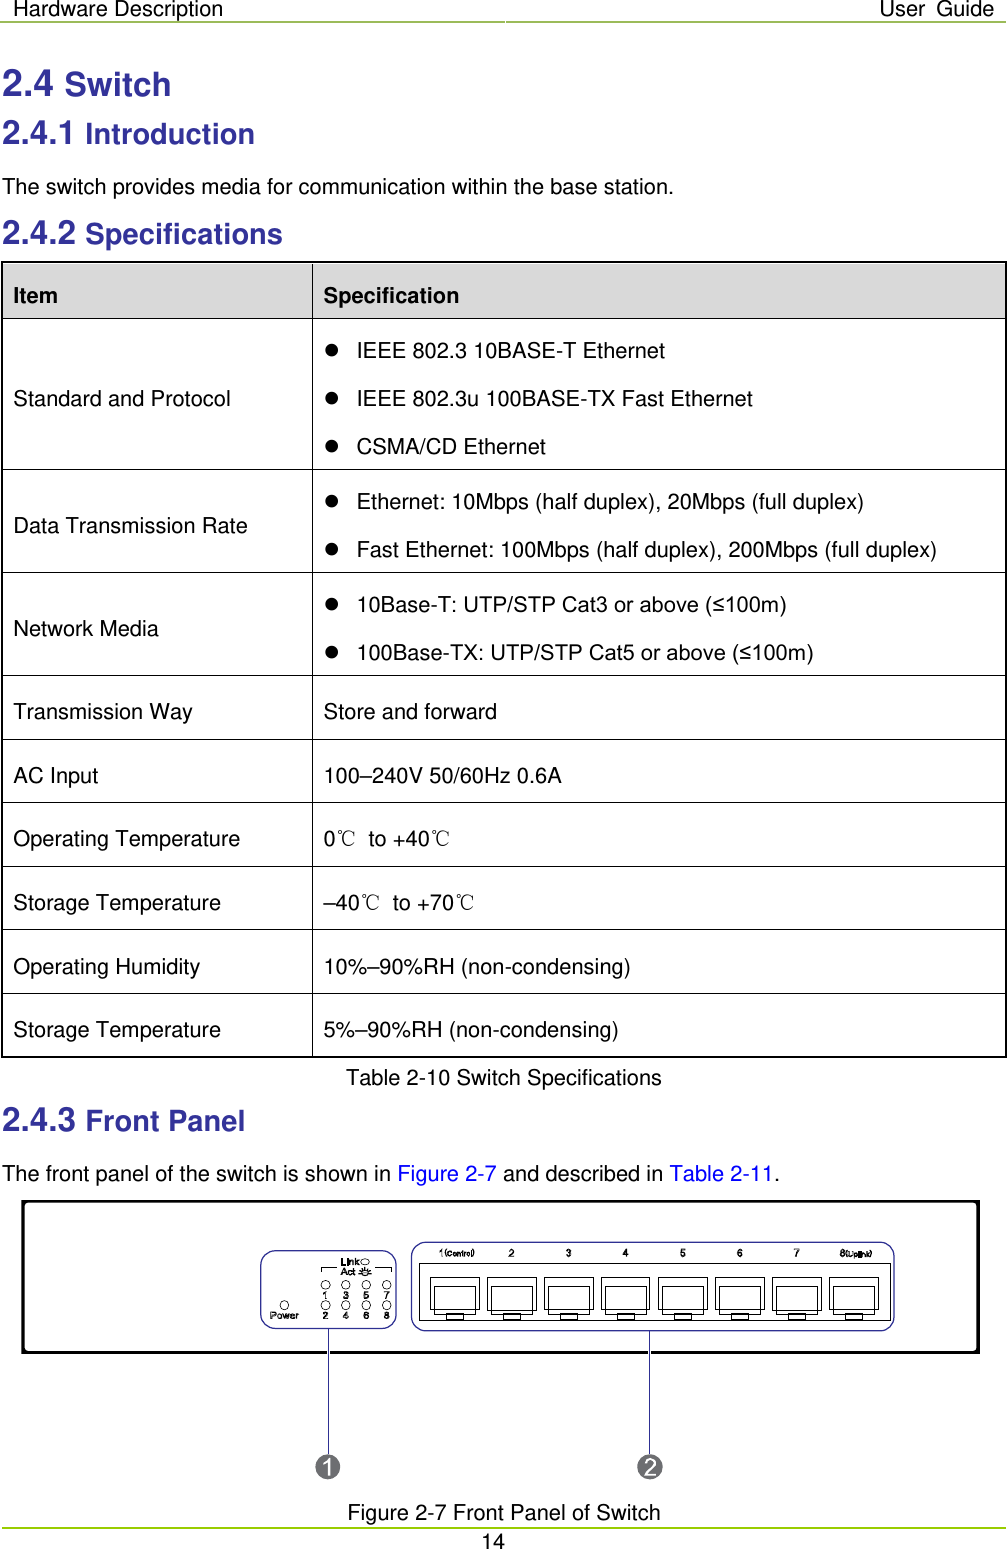 Hardware Description User Guide  14  2.4 Switch 2.4.1 Introduction The switch provides media for communication within the base station.   2.4.2 Specifications Item Specification Standard and Protocol  IEEE 802.3 10BASE-T Ethernet    IEEE 802.3u 100BASE-TX Fast Ethernet    CSMA/CD Ethernet   Data Transmission Rate  Ethernet: 10Mbps (half duplex), 20Mbps (full duplex)    Fast Ethernet: 100Mbps (half duplex), 200Mbps (full duplex)   Network Media  10Base-T: UTP/STP Cat3 or above (≤100m)    100Base-TX: UTP/STP Cat5 or above (≤100m)   Transmission Way Store and forward AC Input 100–240V 50/60Hz 0.6A Operating Temperature  0℃ to +40℃ Storage Temperature  –40℃ to +70℃ Operating Humidity 10%–90%RH (non-condensing) Storage Temperature 5%–90%RH (non-condensing) Table 2-10 Switch Specifications 2.4.3 Front Panel The front panel of the switch is shown in Figure 2-7 and described in Table 2-11.  Figure 2-7 Front Panel of Switch 